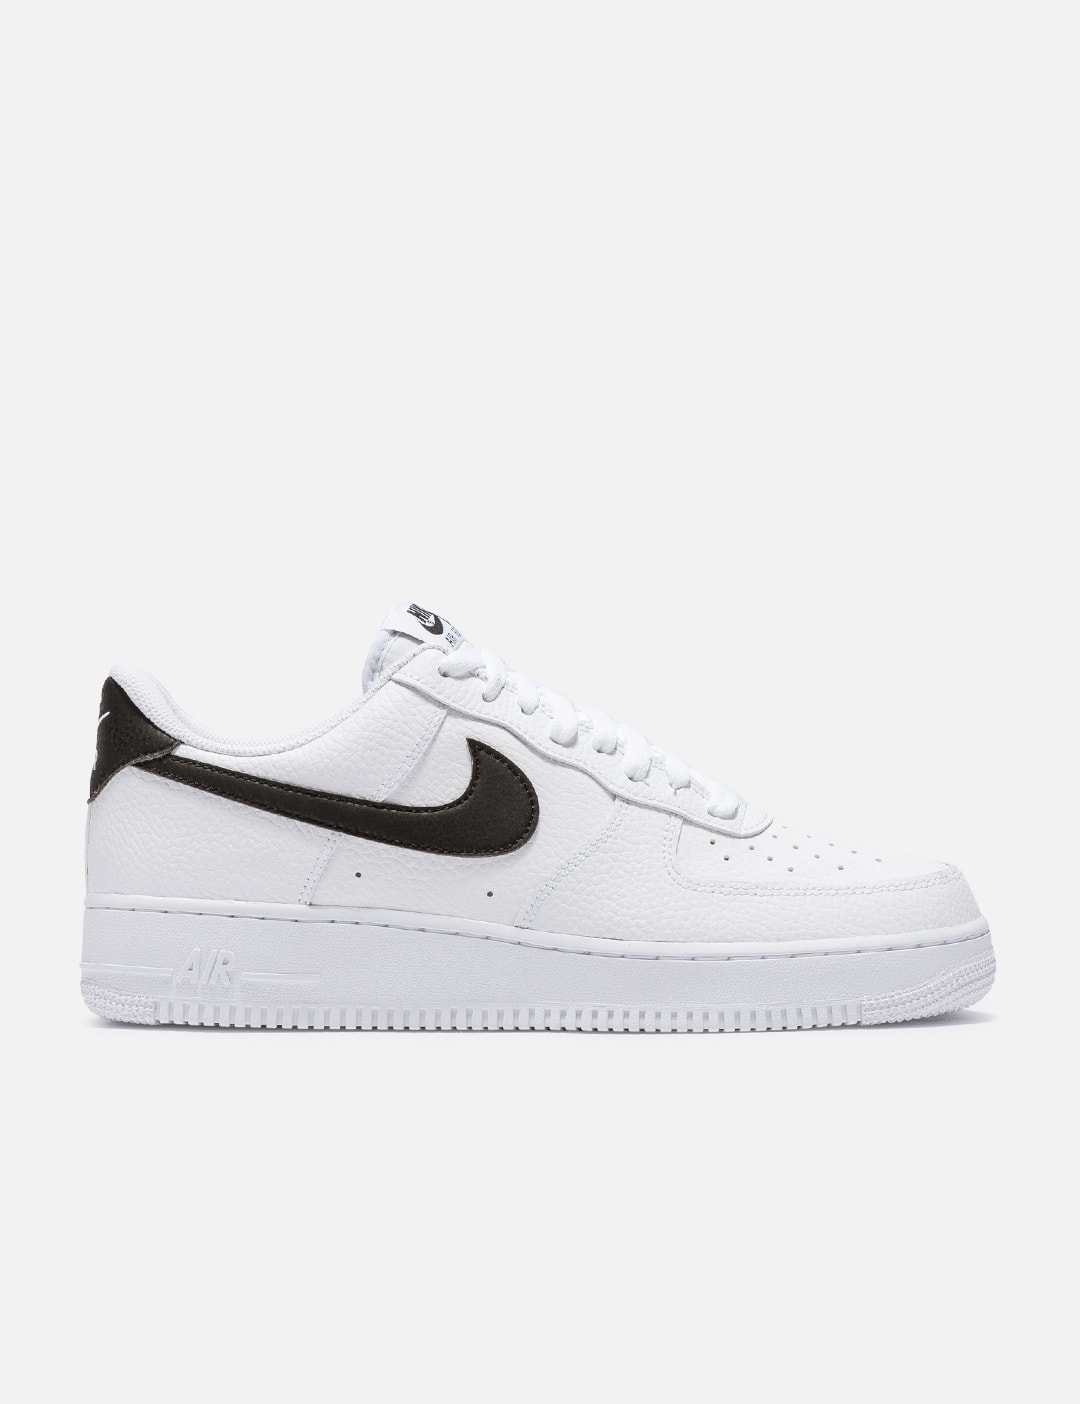 Nike - Nike Air Force 1 '07 LV8  HBX - Globally Curated Fashion and  Lifestyle by Hypebeast